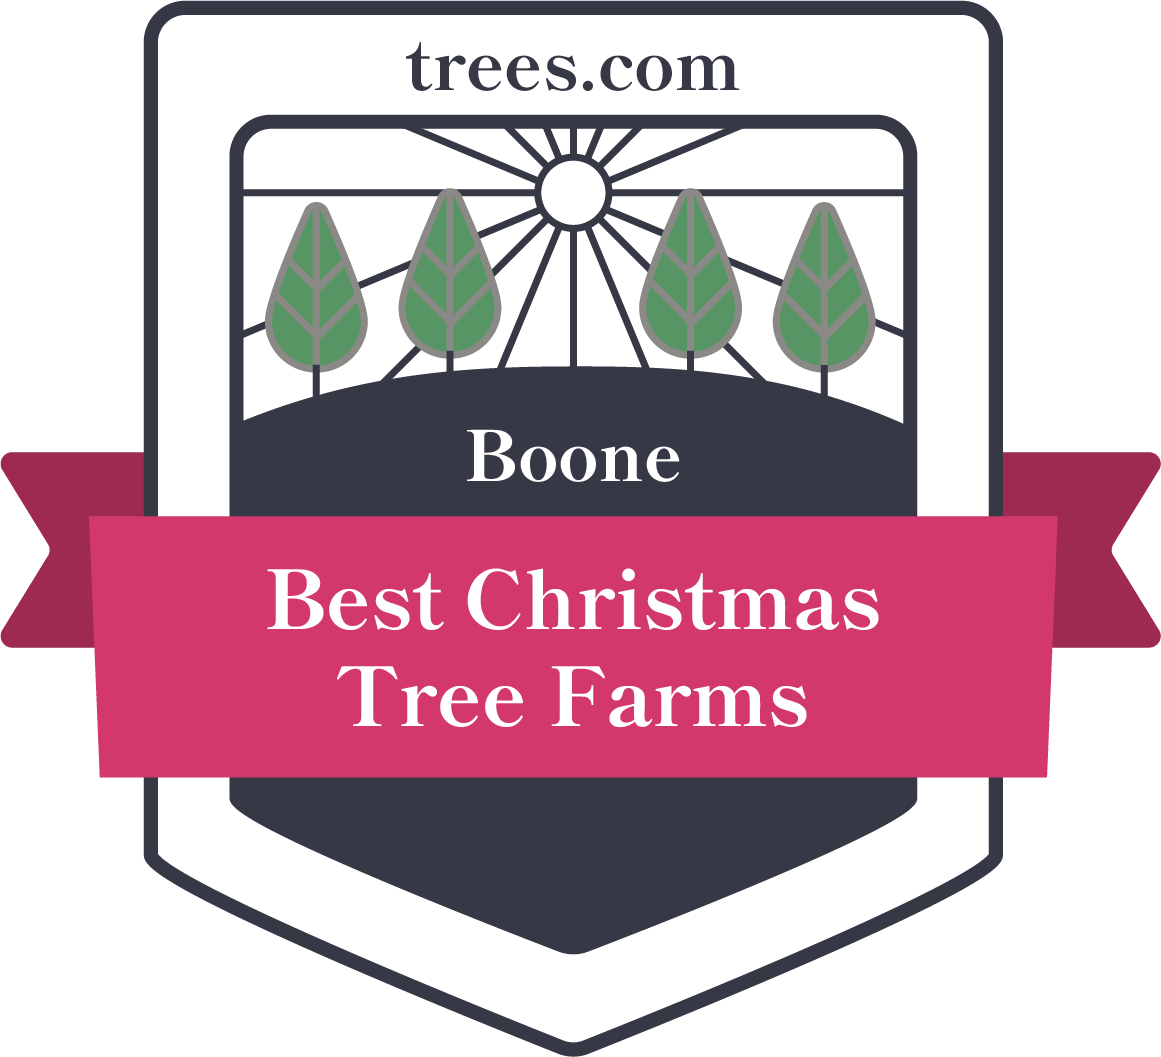 Christmas Tree Farm For Sale In Boone Nc